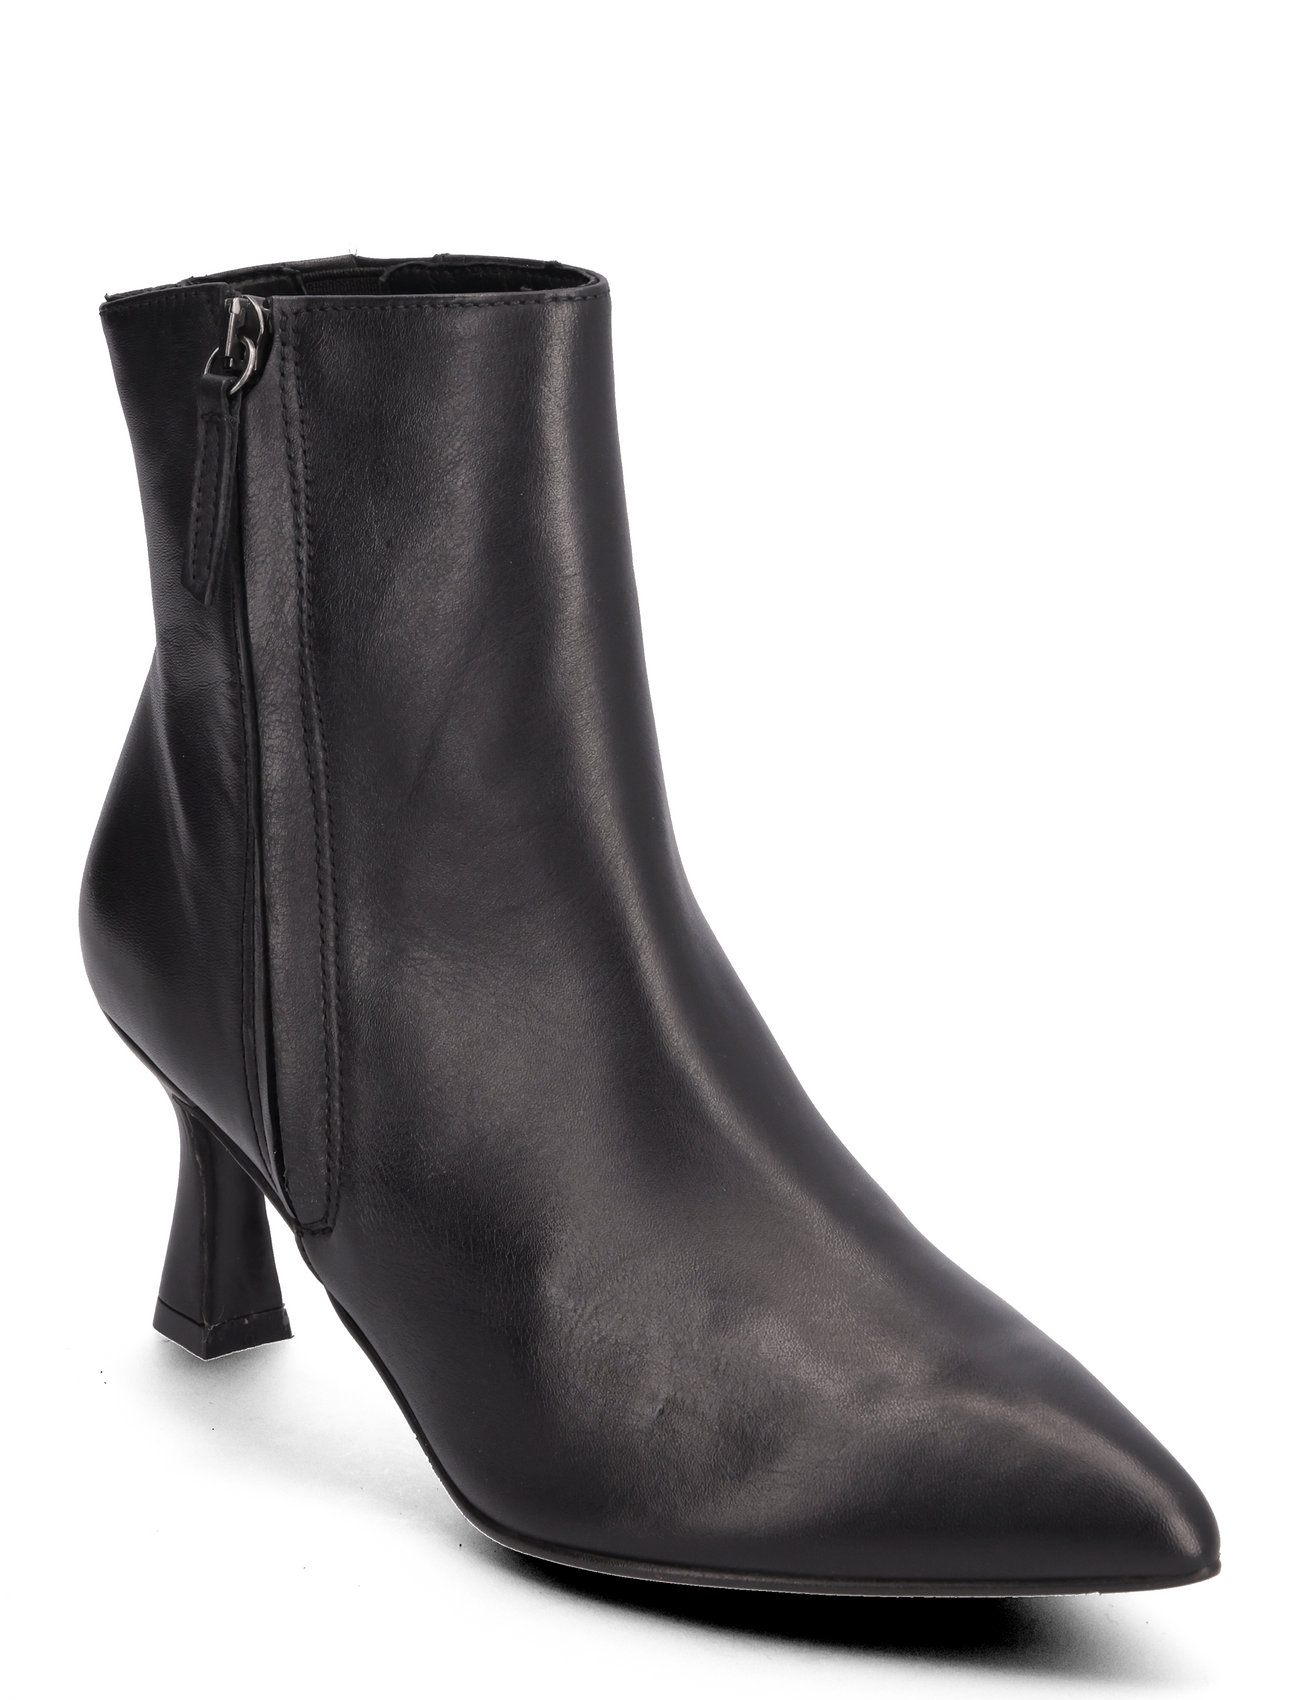 Shanice Leather Shoes Boots Ankle Boots Ankle Boots With Heel Black Pavement